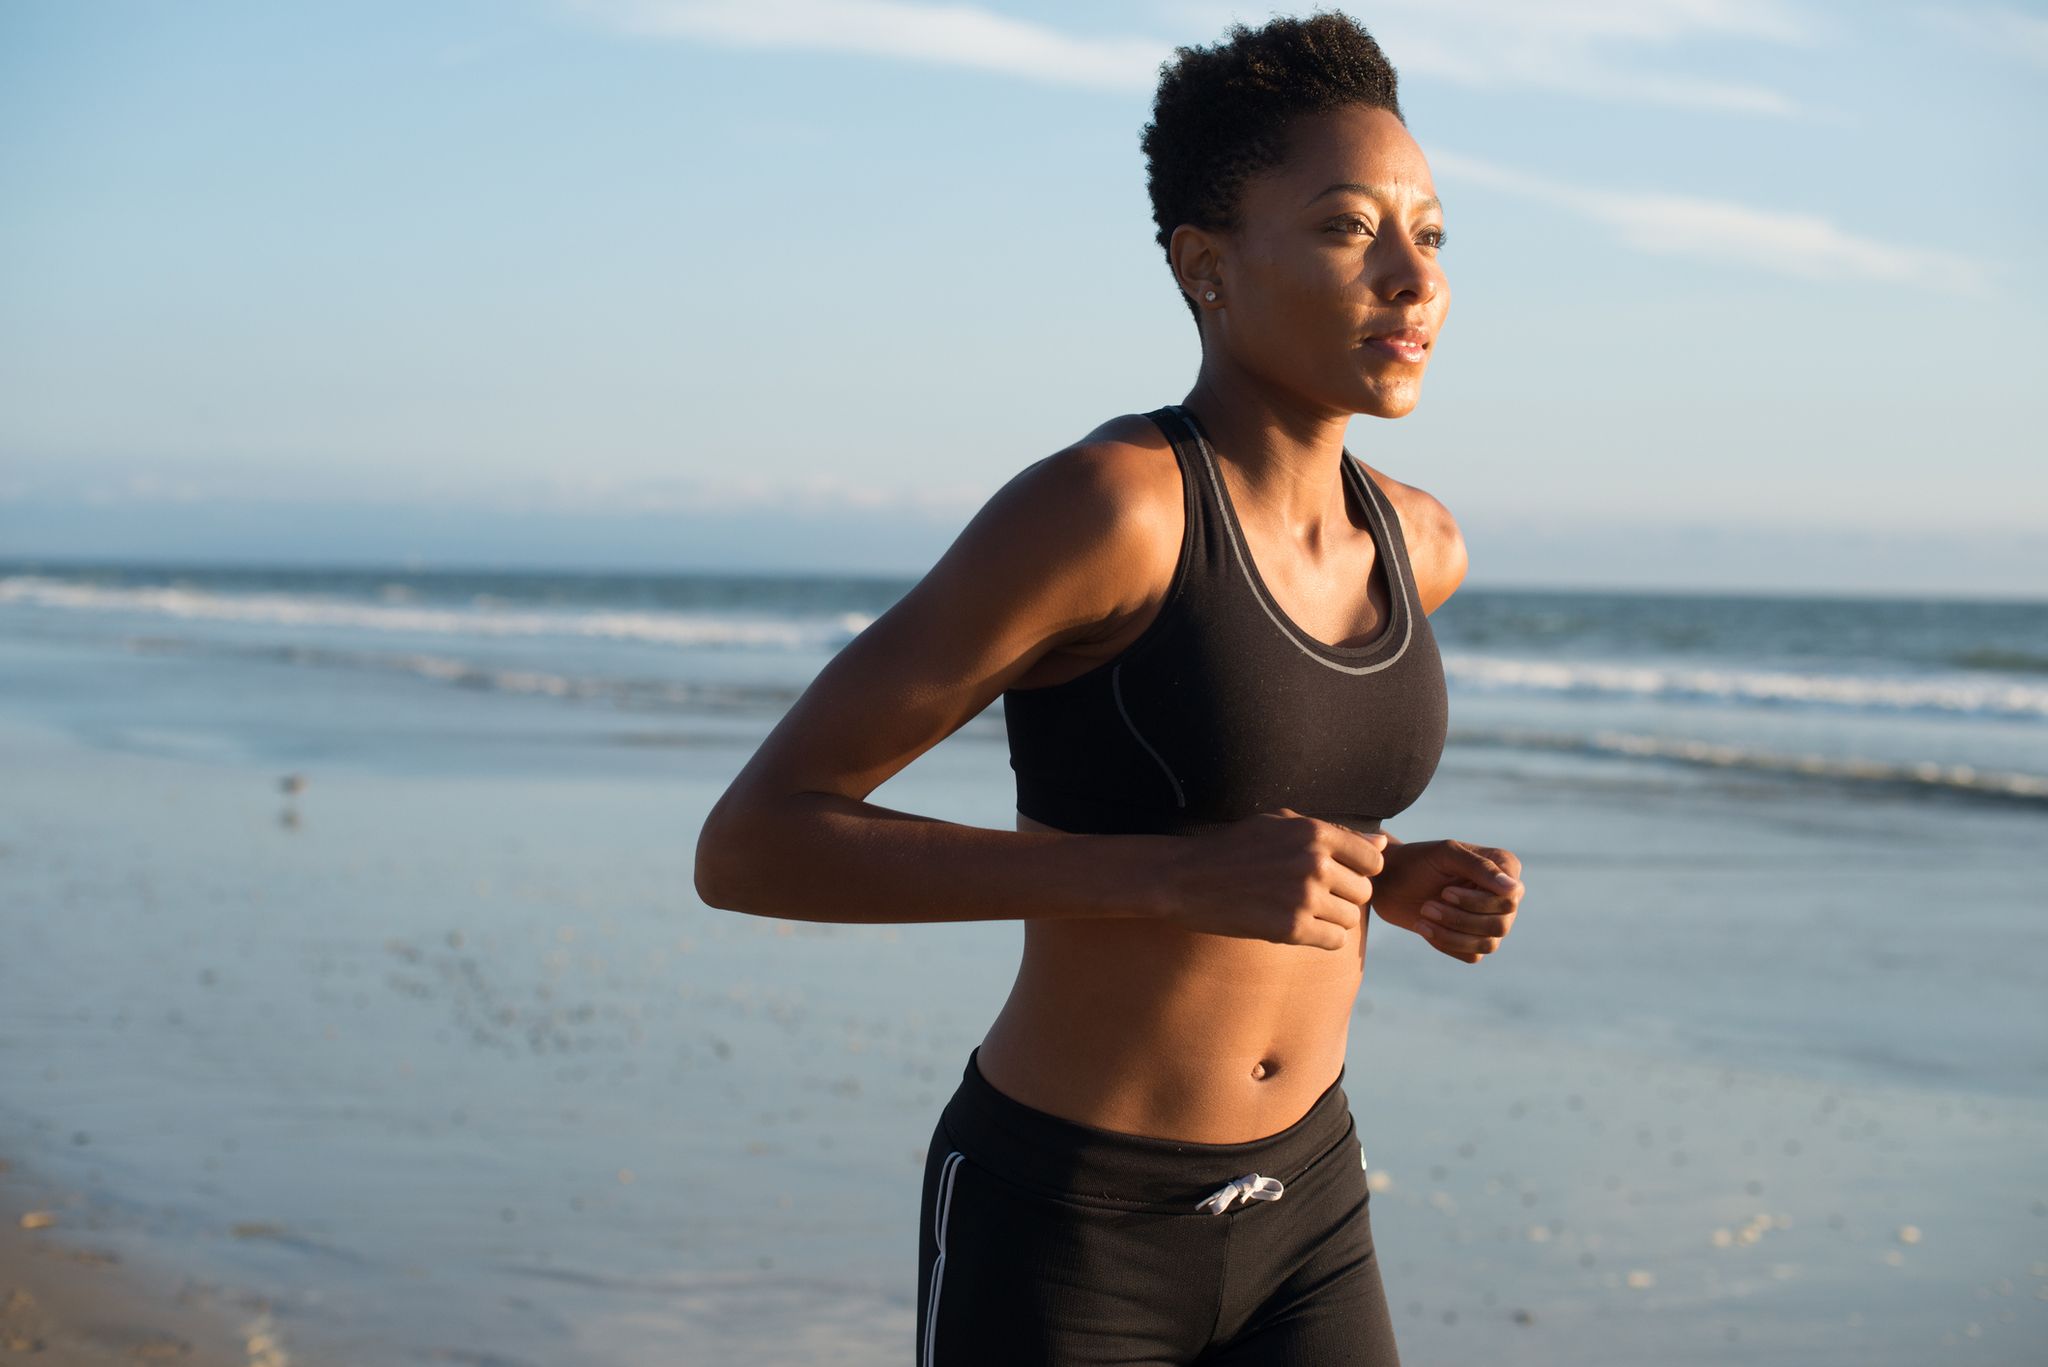 I Went Running In Just A Sports Bra & Here's What Happened